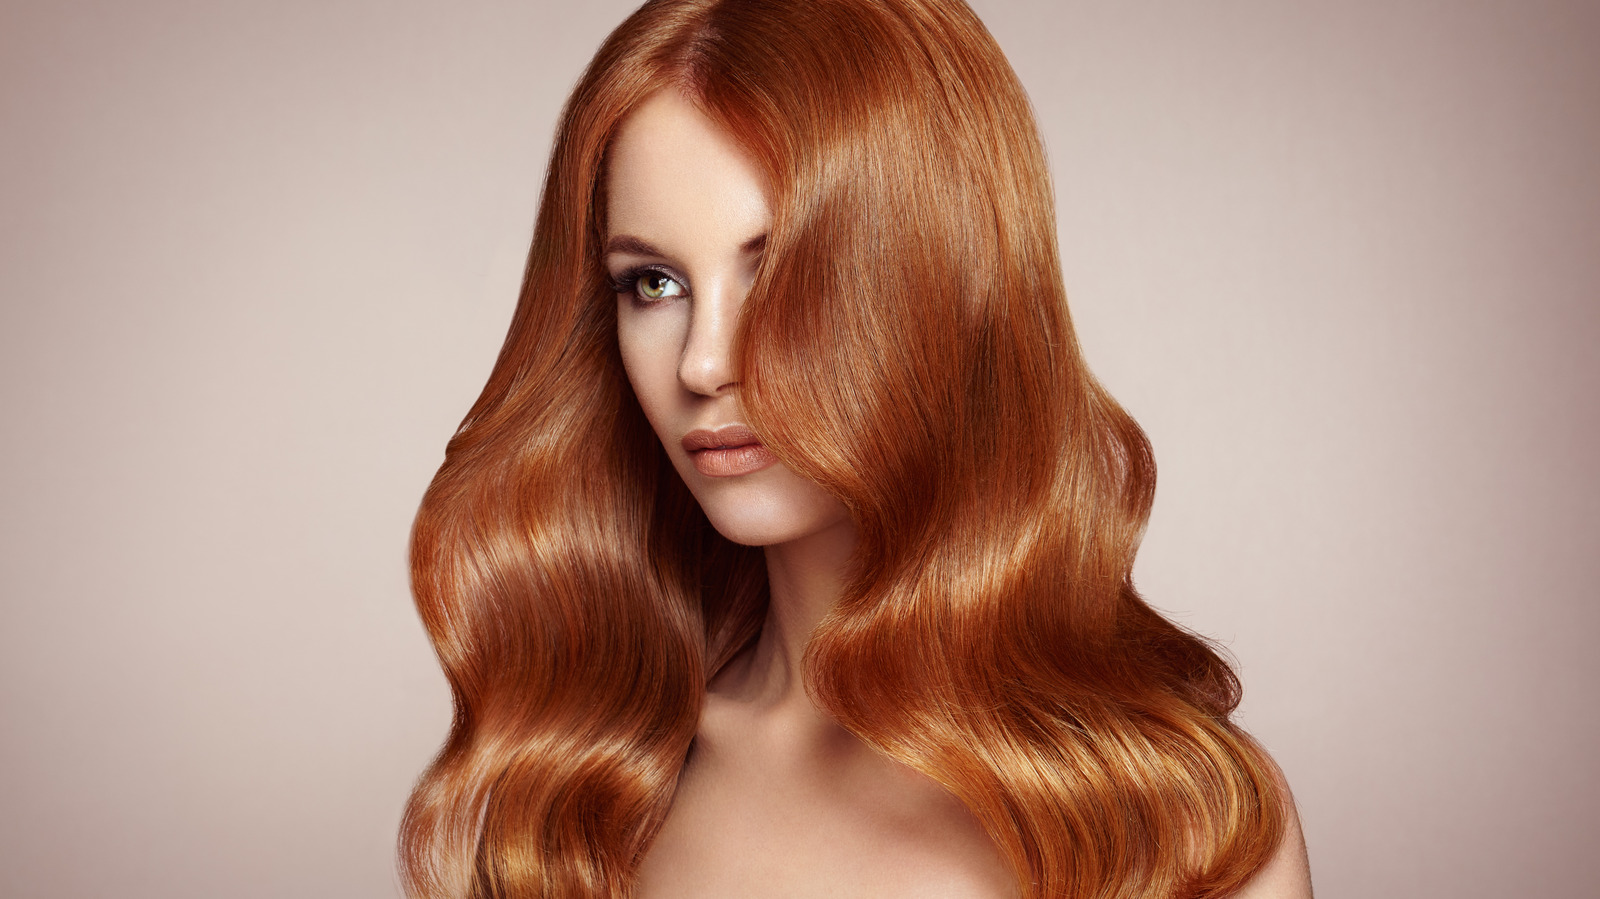 3. Best Hair Dyes for Auburn Hair to Go Blonde - wide 3